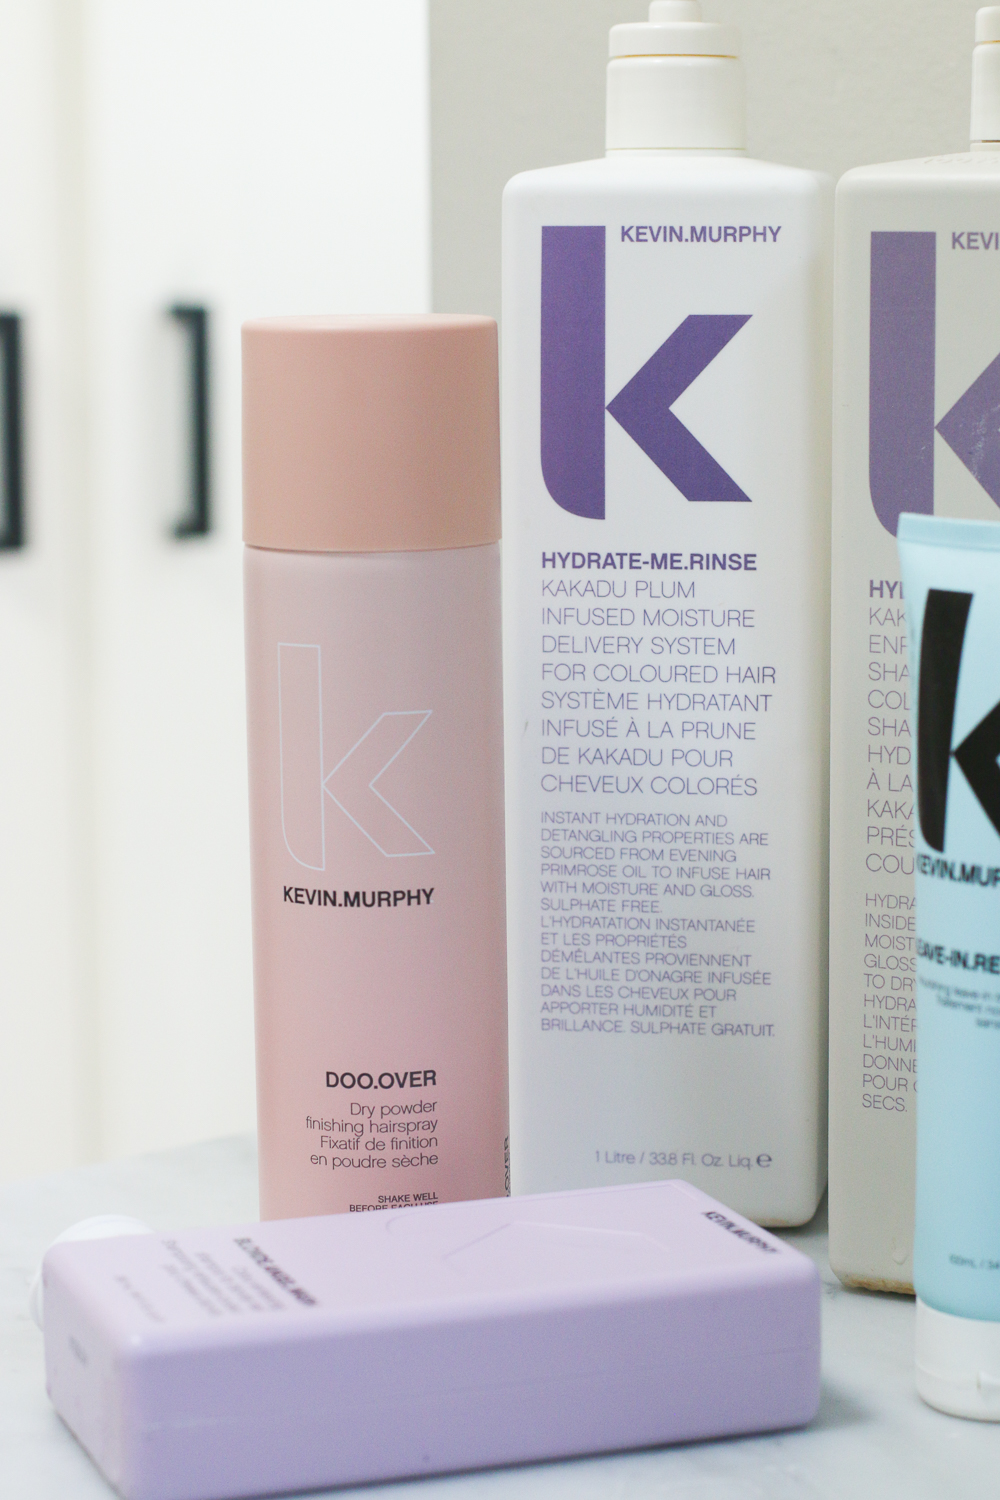 kevin murphy hair care products on a bathroom counter